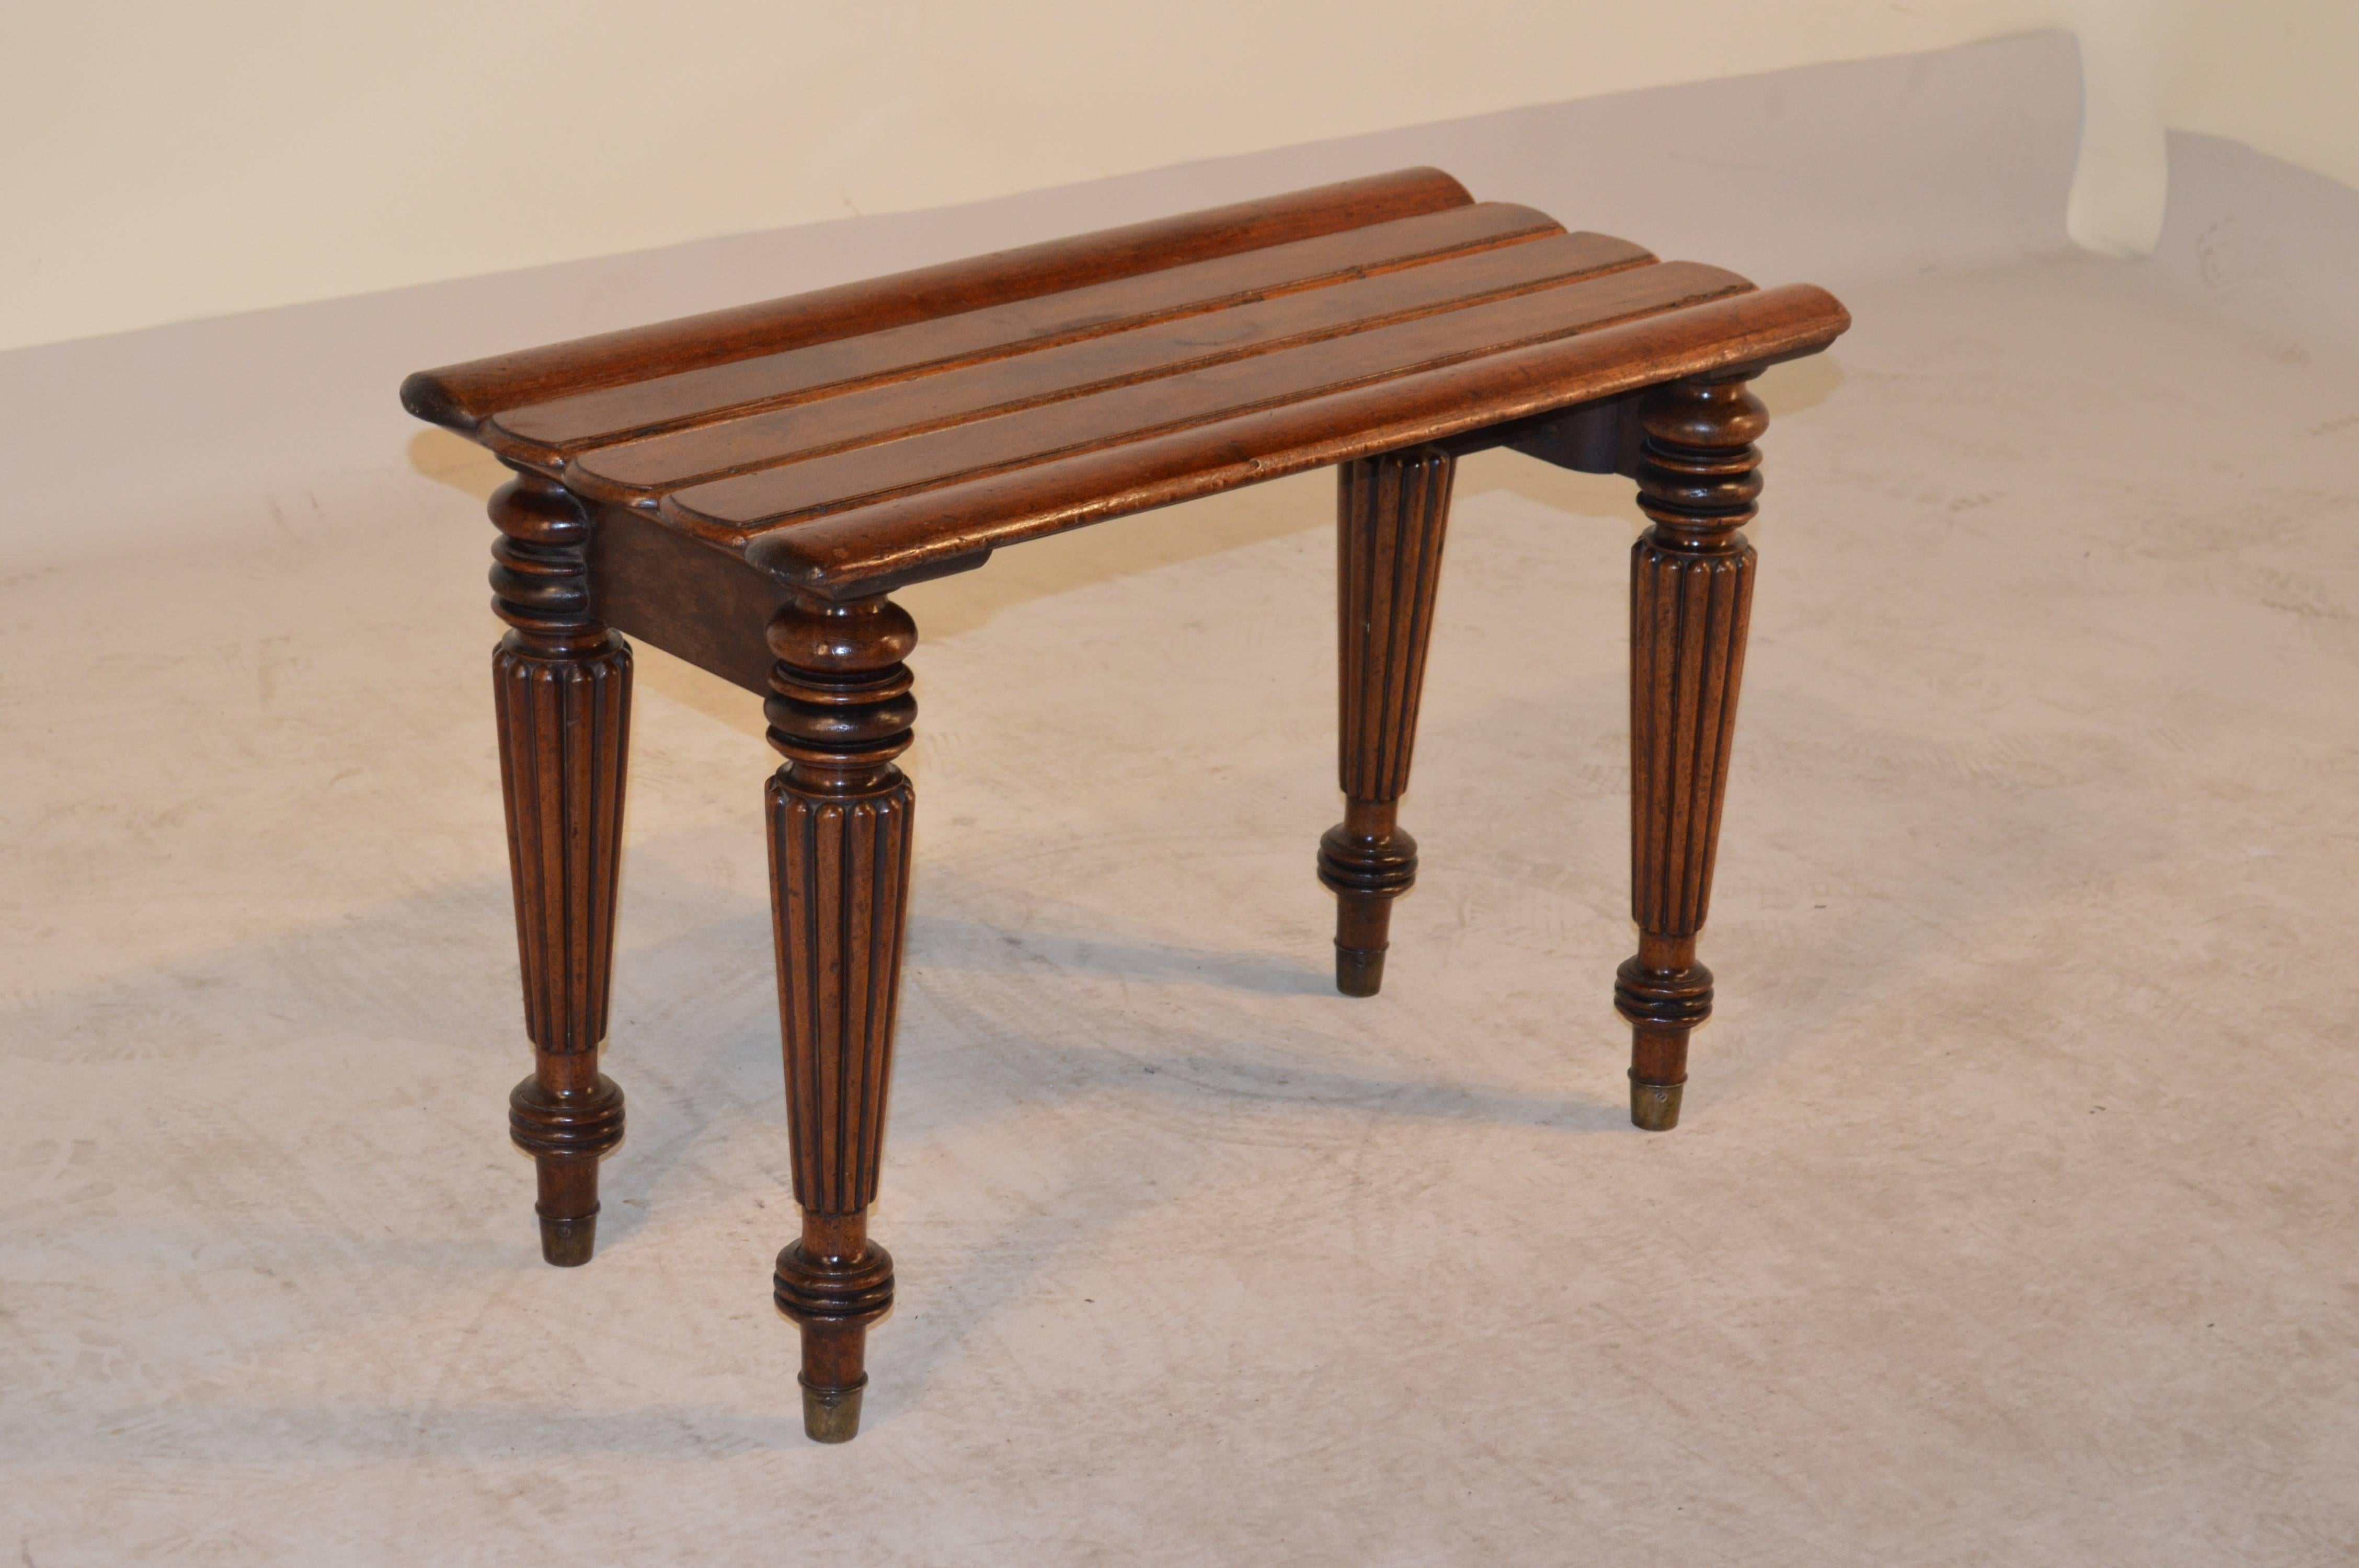 Early Victorian 19th Century English Mahogany Luggage Stand